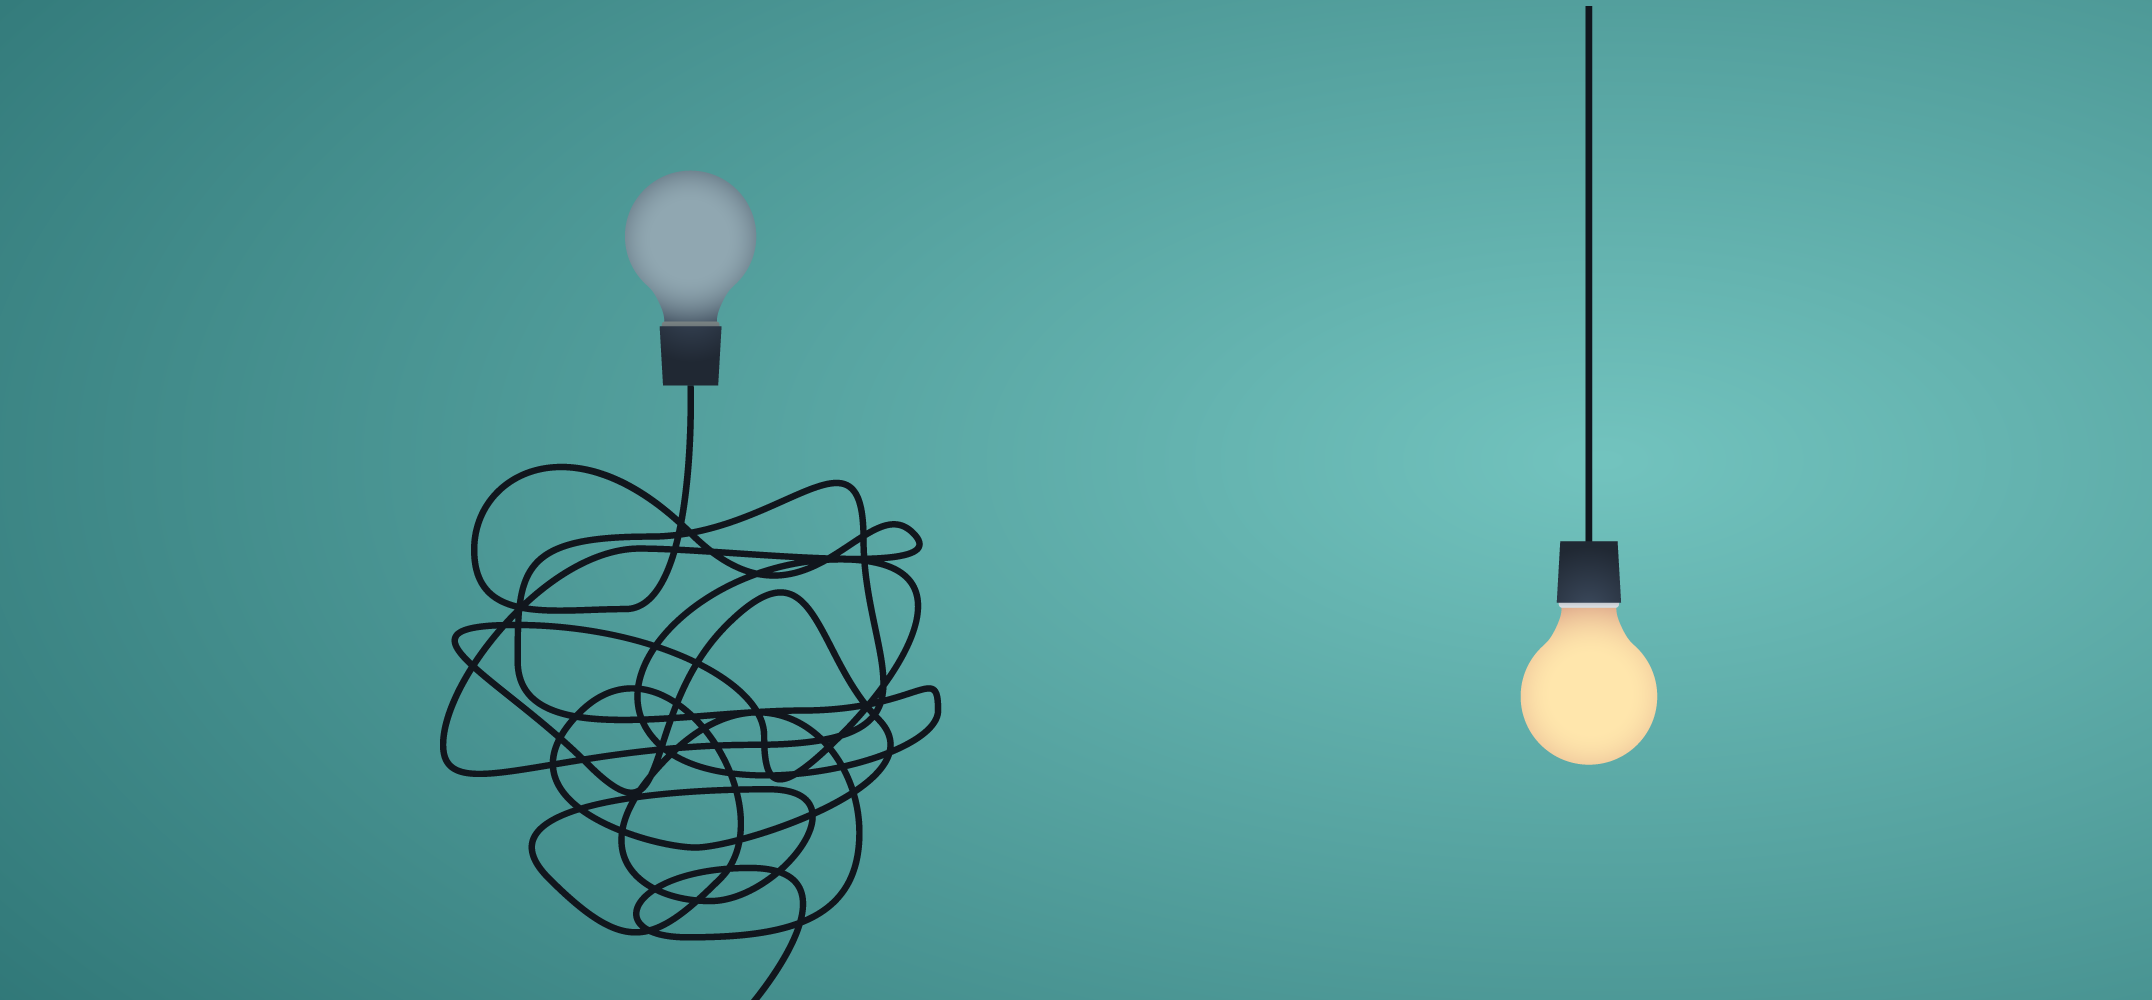 Light bulb with straight cord and lightbulb with tangled cord